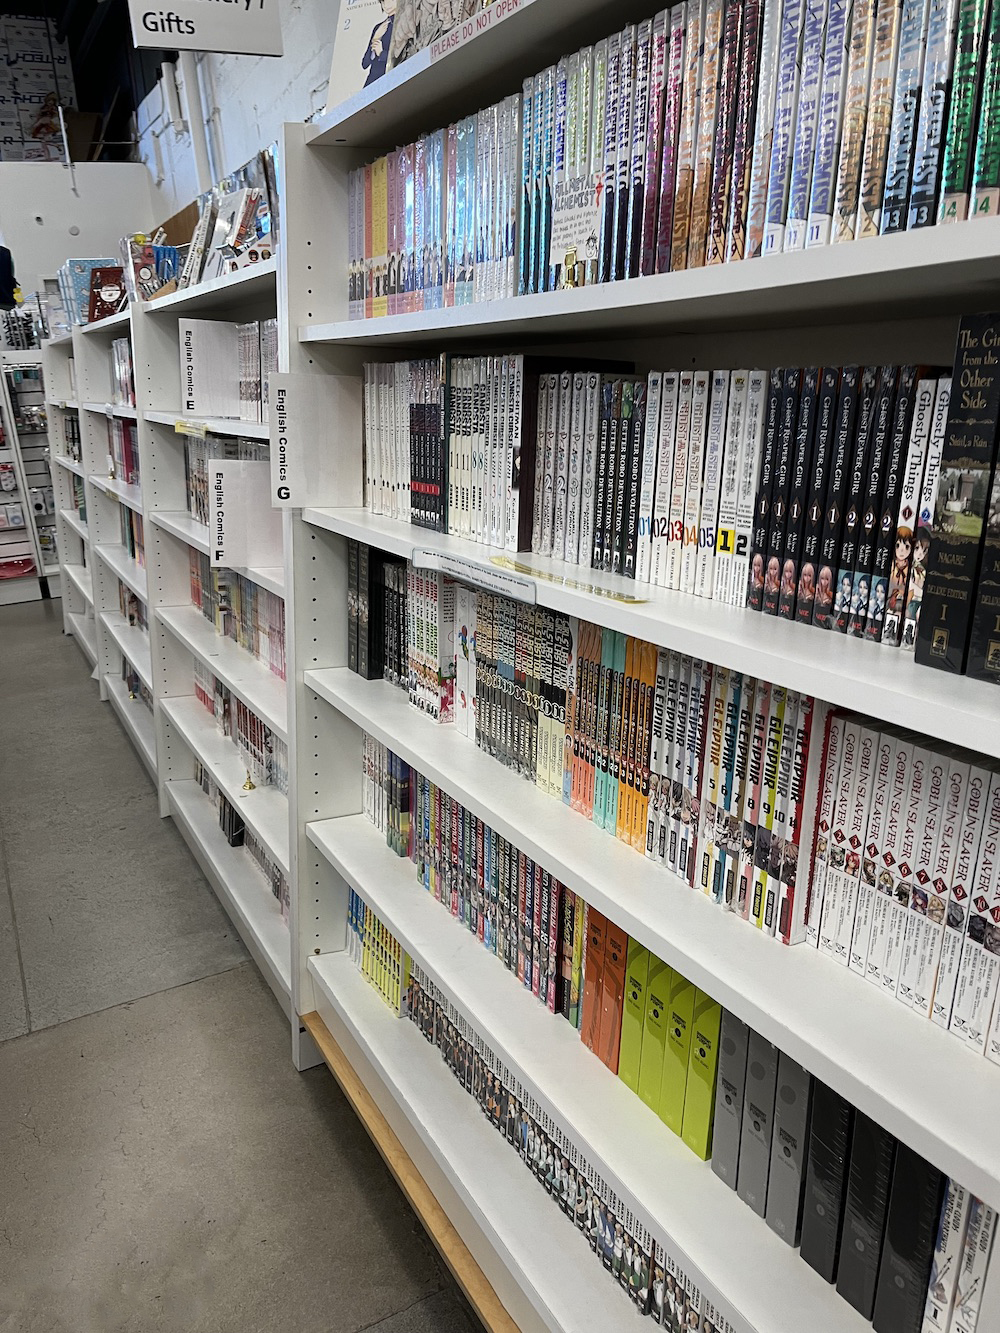 A bookshelf at Kinokuniya that shows how manga is often sorted alphabetically by book title.